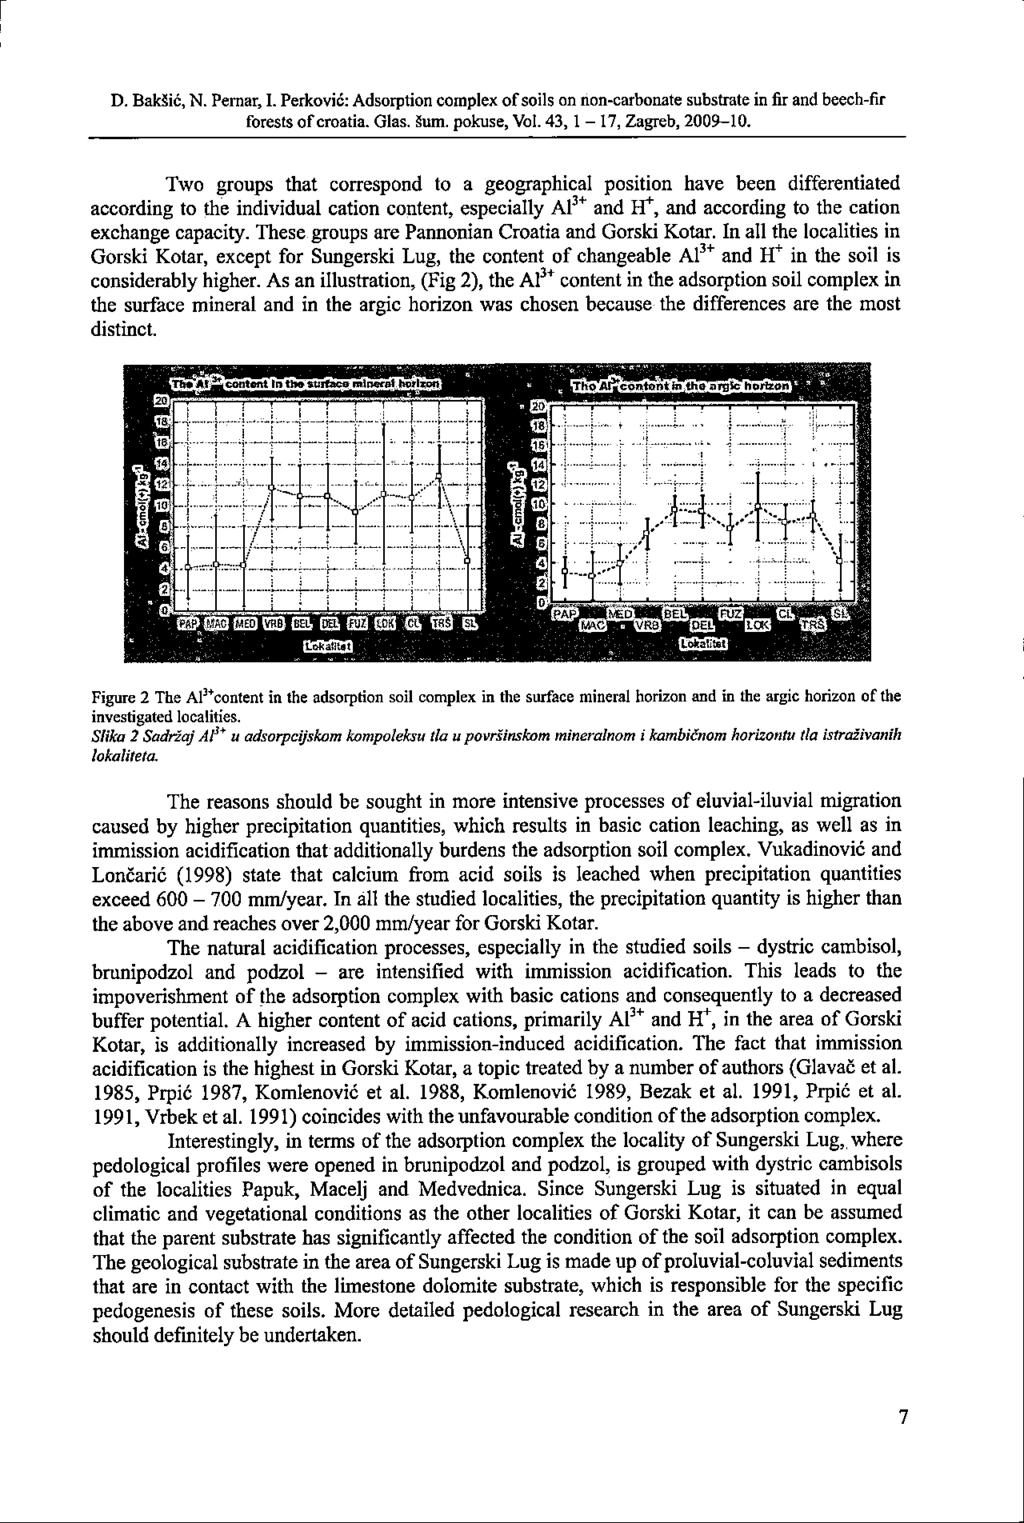 D. BakSic,. Peraar, I. Perkovic: Adsorption complex of soils on noncarbonate substrate in fir and beechfir forests of Croatia. Glas. Sum. pokuse, Vol. 43,1 17, Zagreb, 200910.